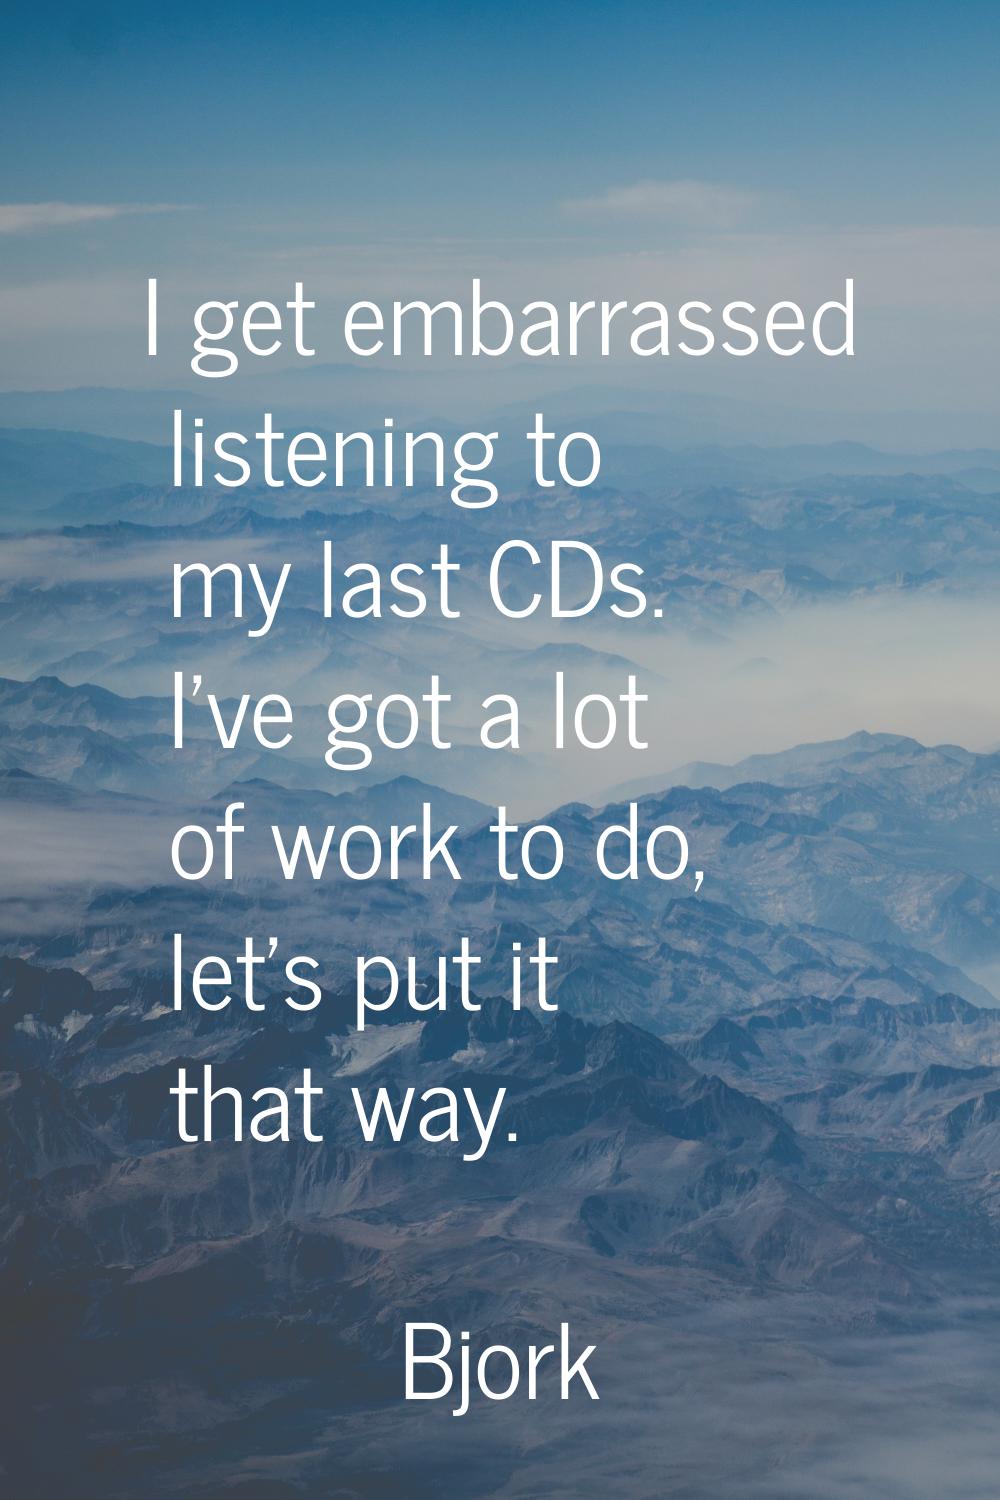 I get embarrassed listening to my last CDs. I've got a lot of work to do, let's put it that way.